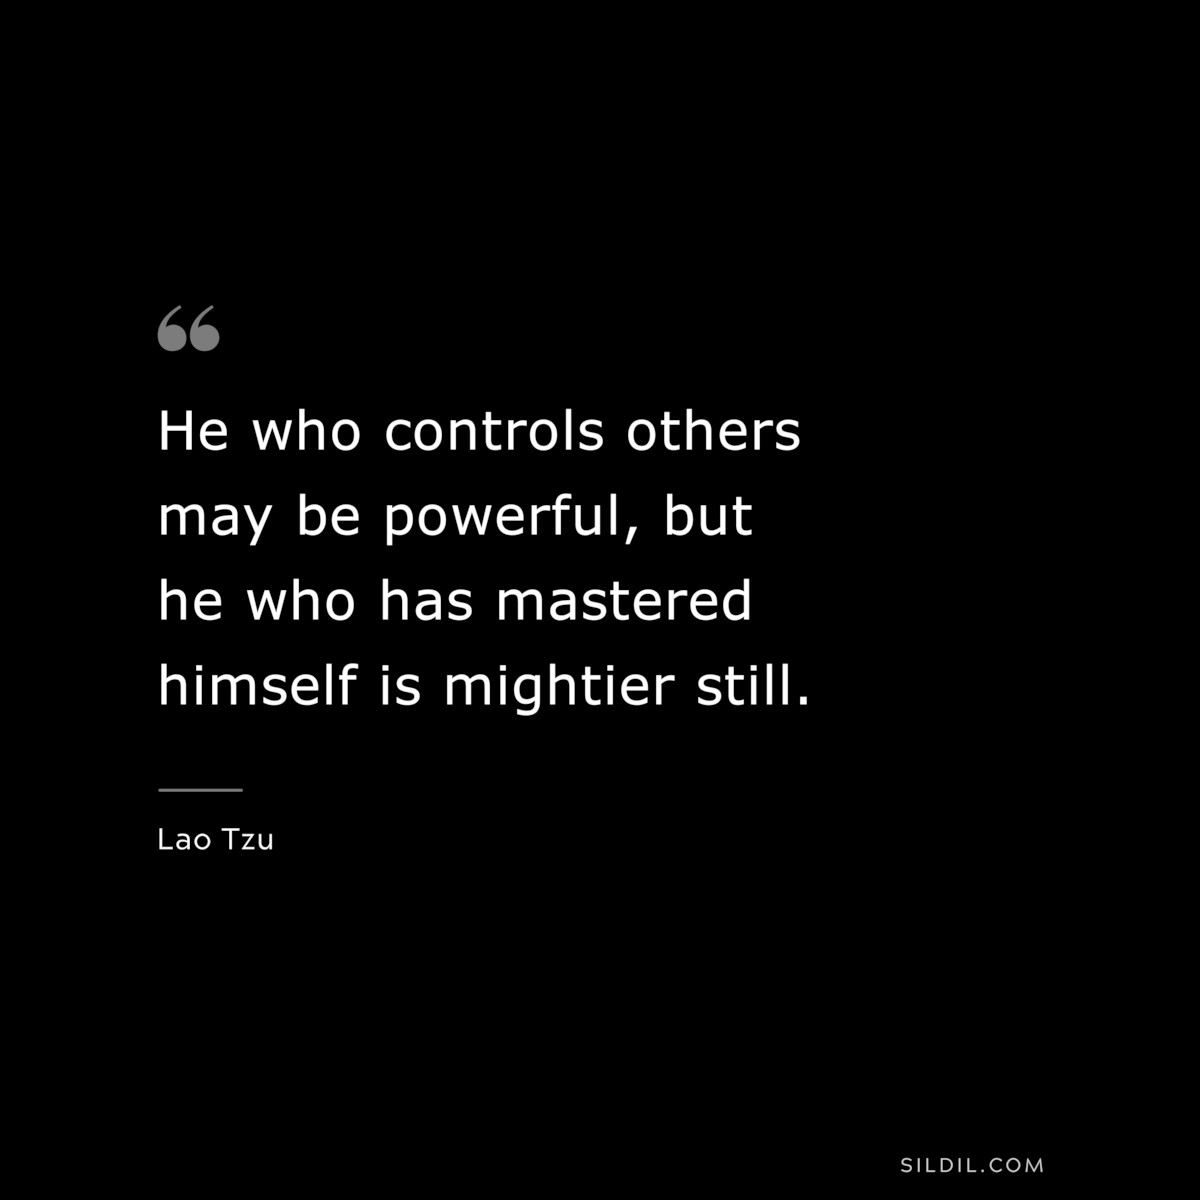 He who controls others may be powerful, but he who has mastered himself is mightier still. ― Lao Tzu